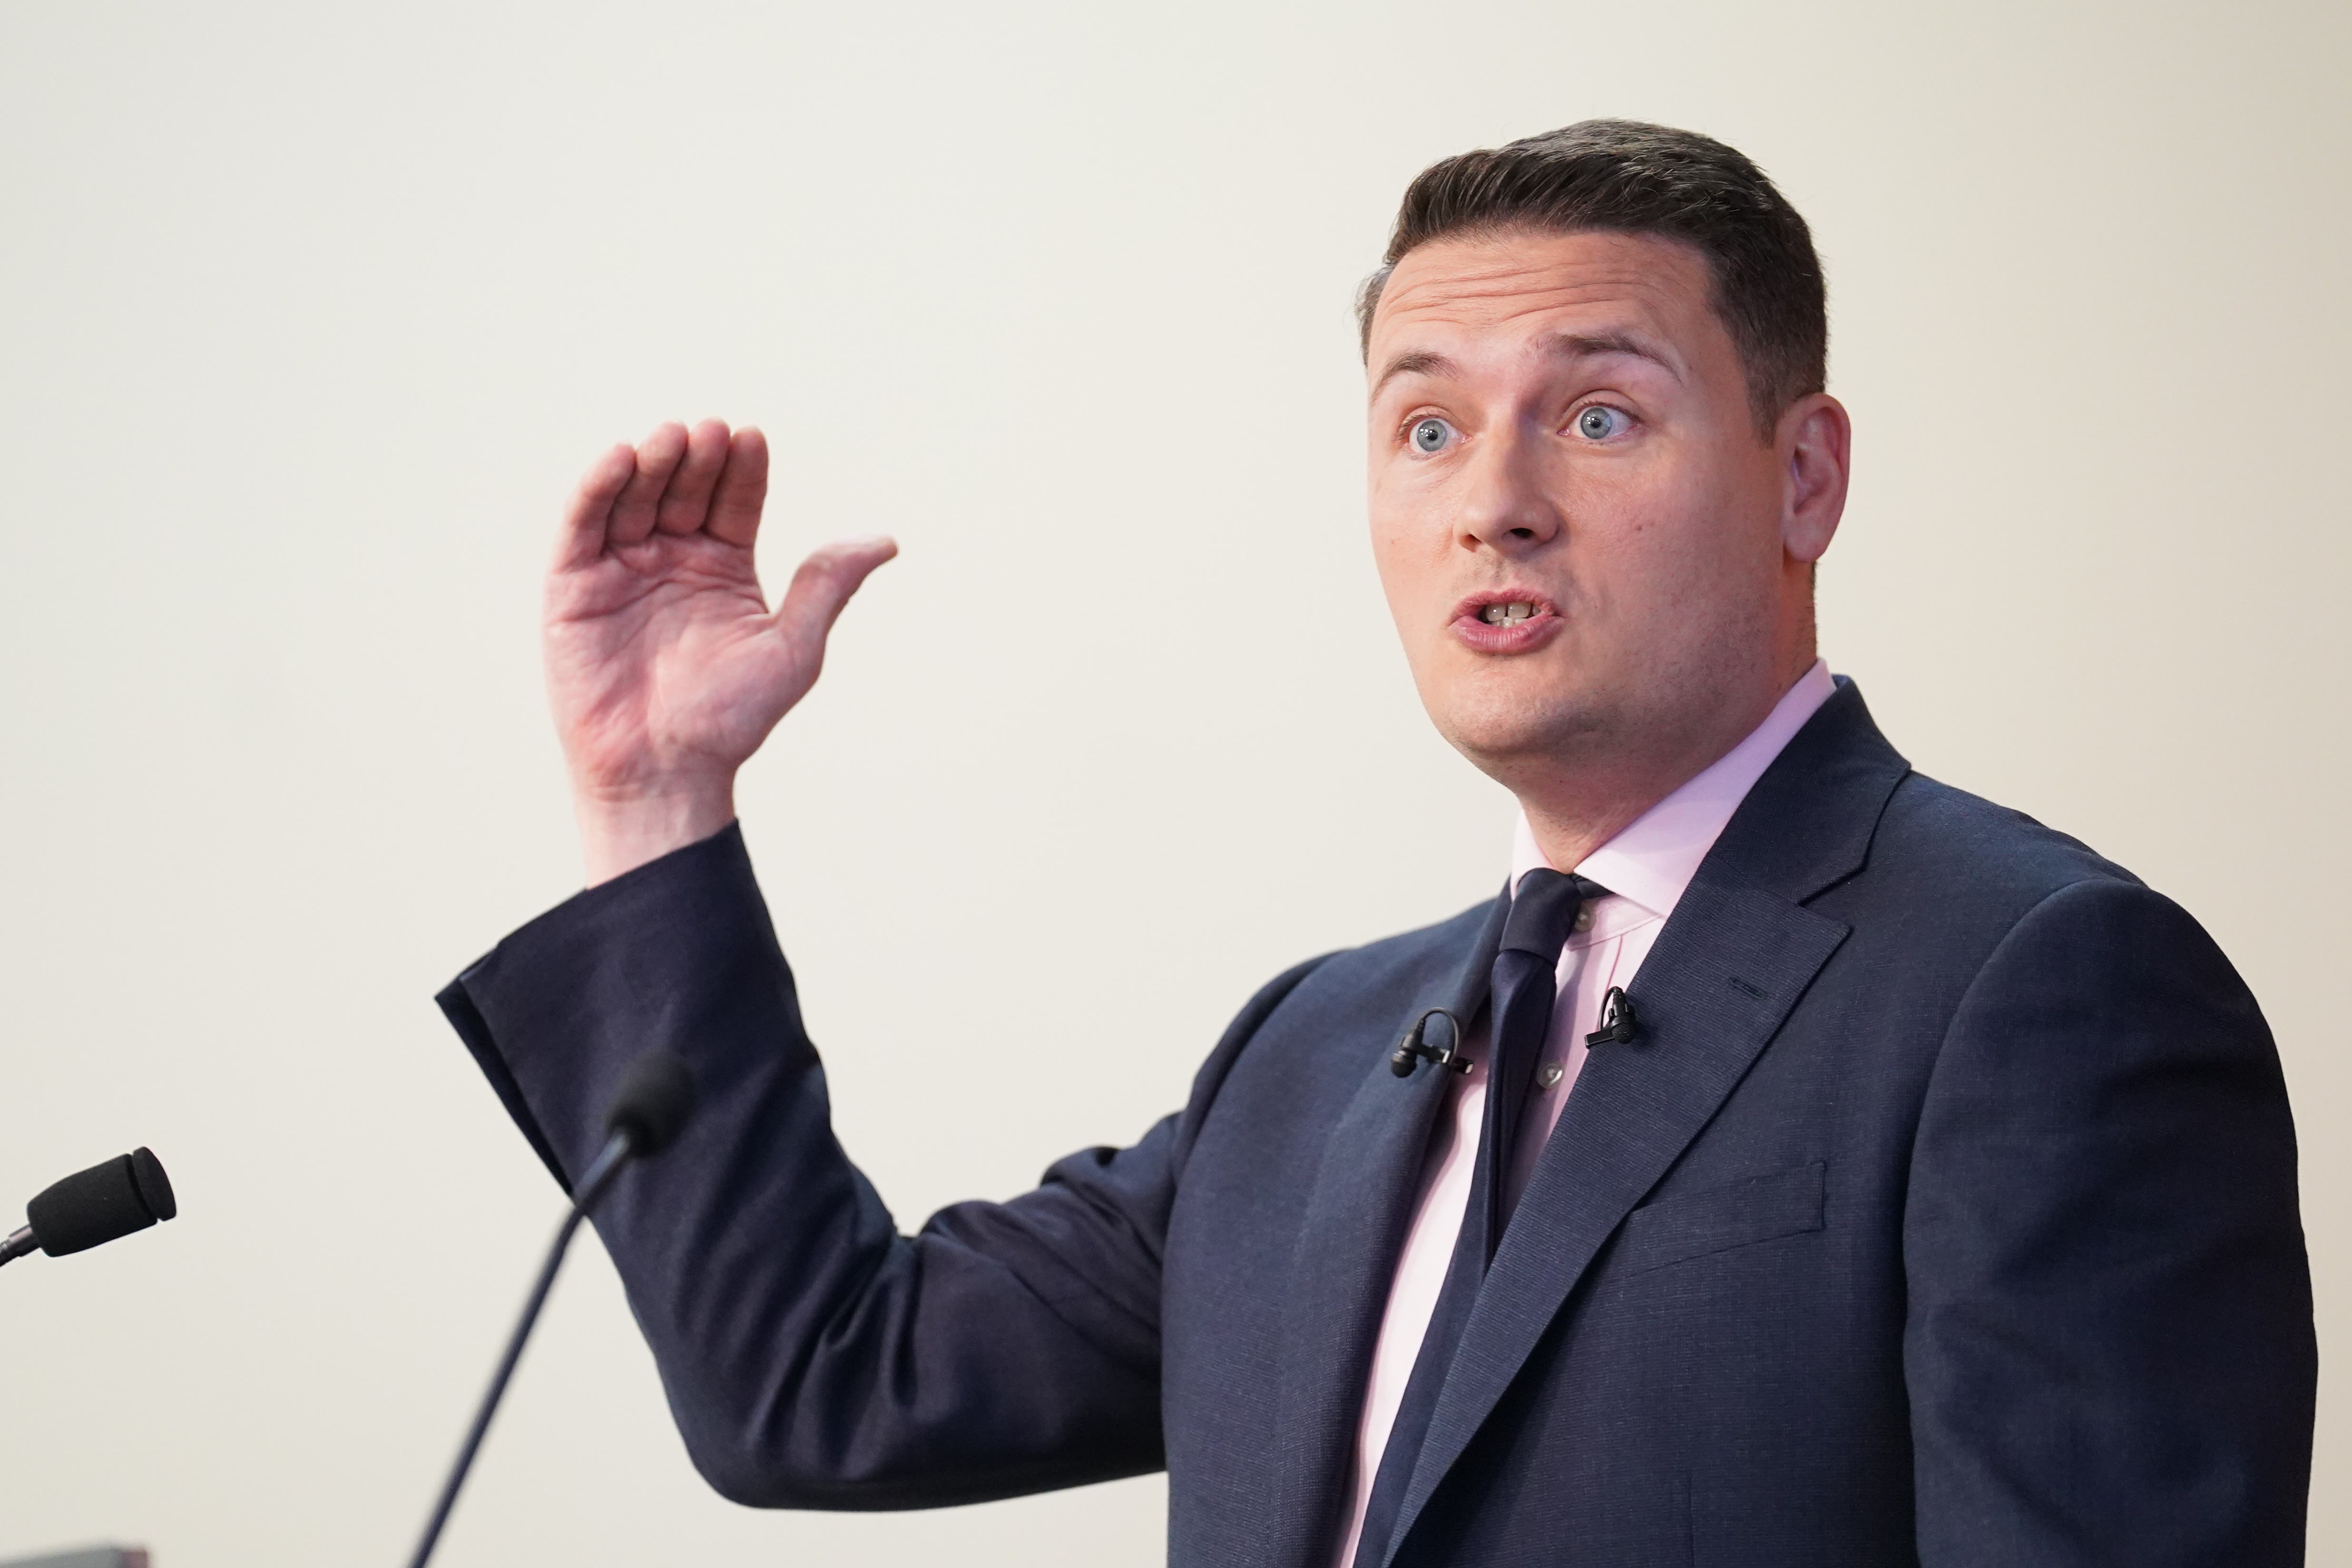 Wes Streeting said he ‘does not agree’ with Sir Tony